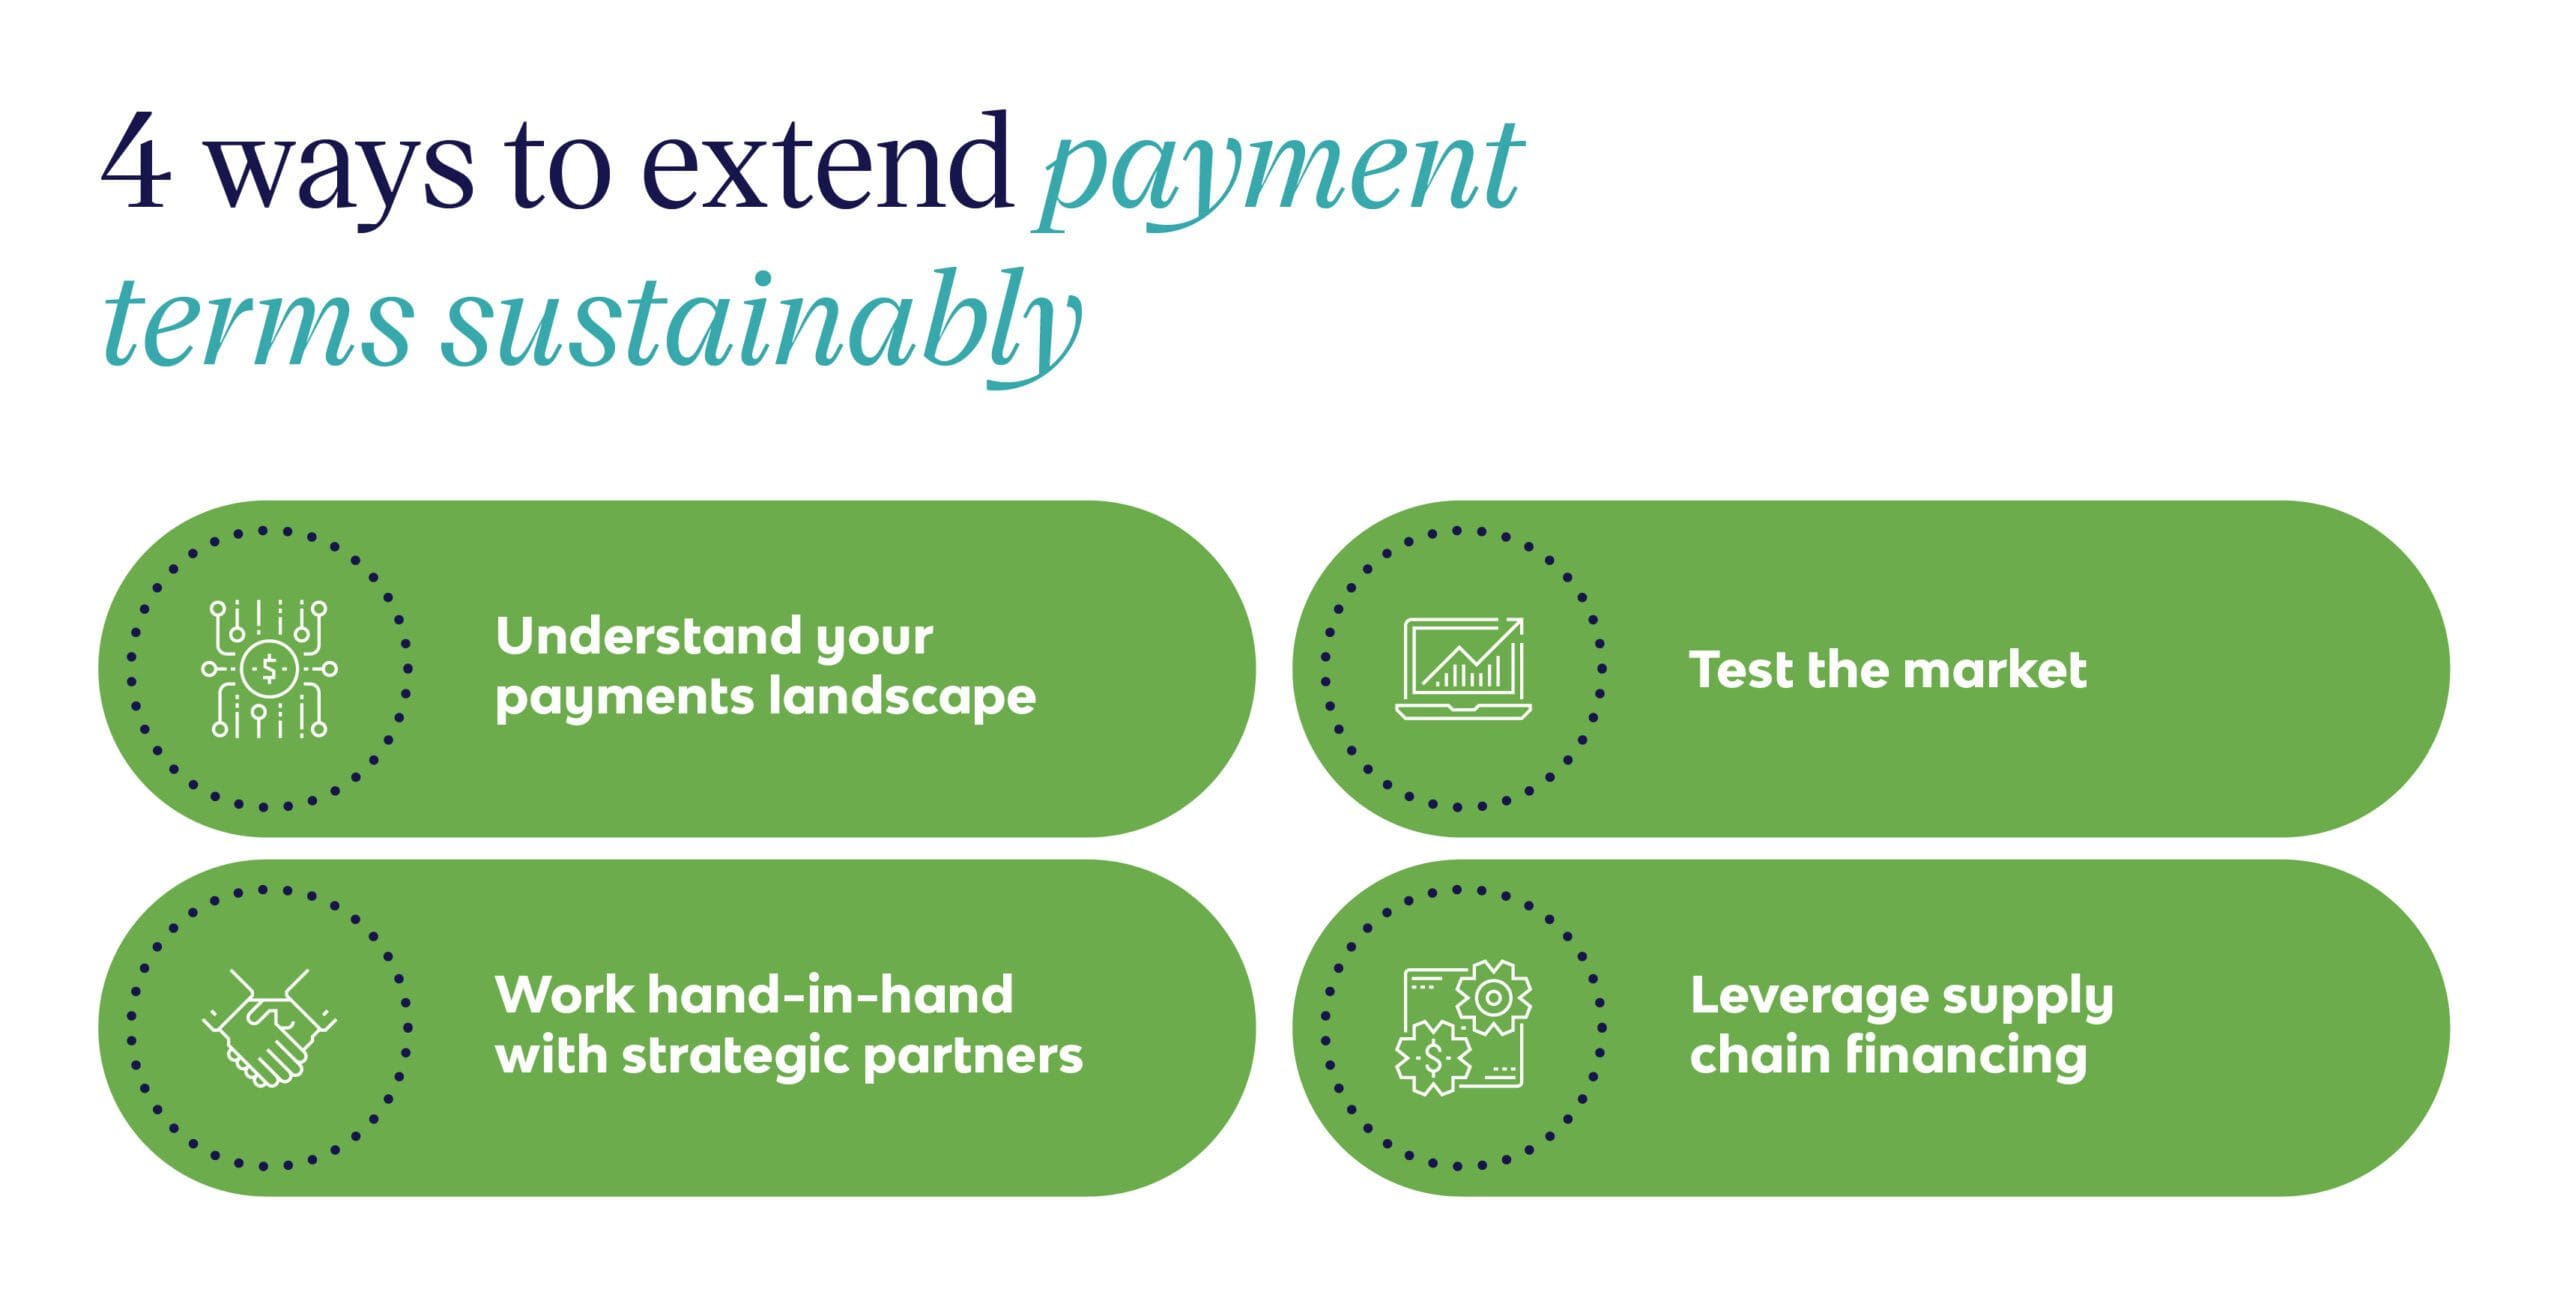 Four ways to extend supplier payment terms sustainably, from understanding the payments landscape to leveraging supply chain financing.